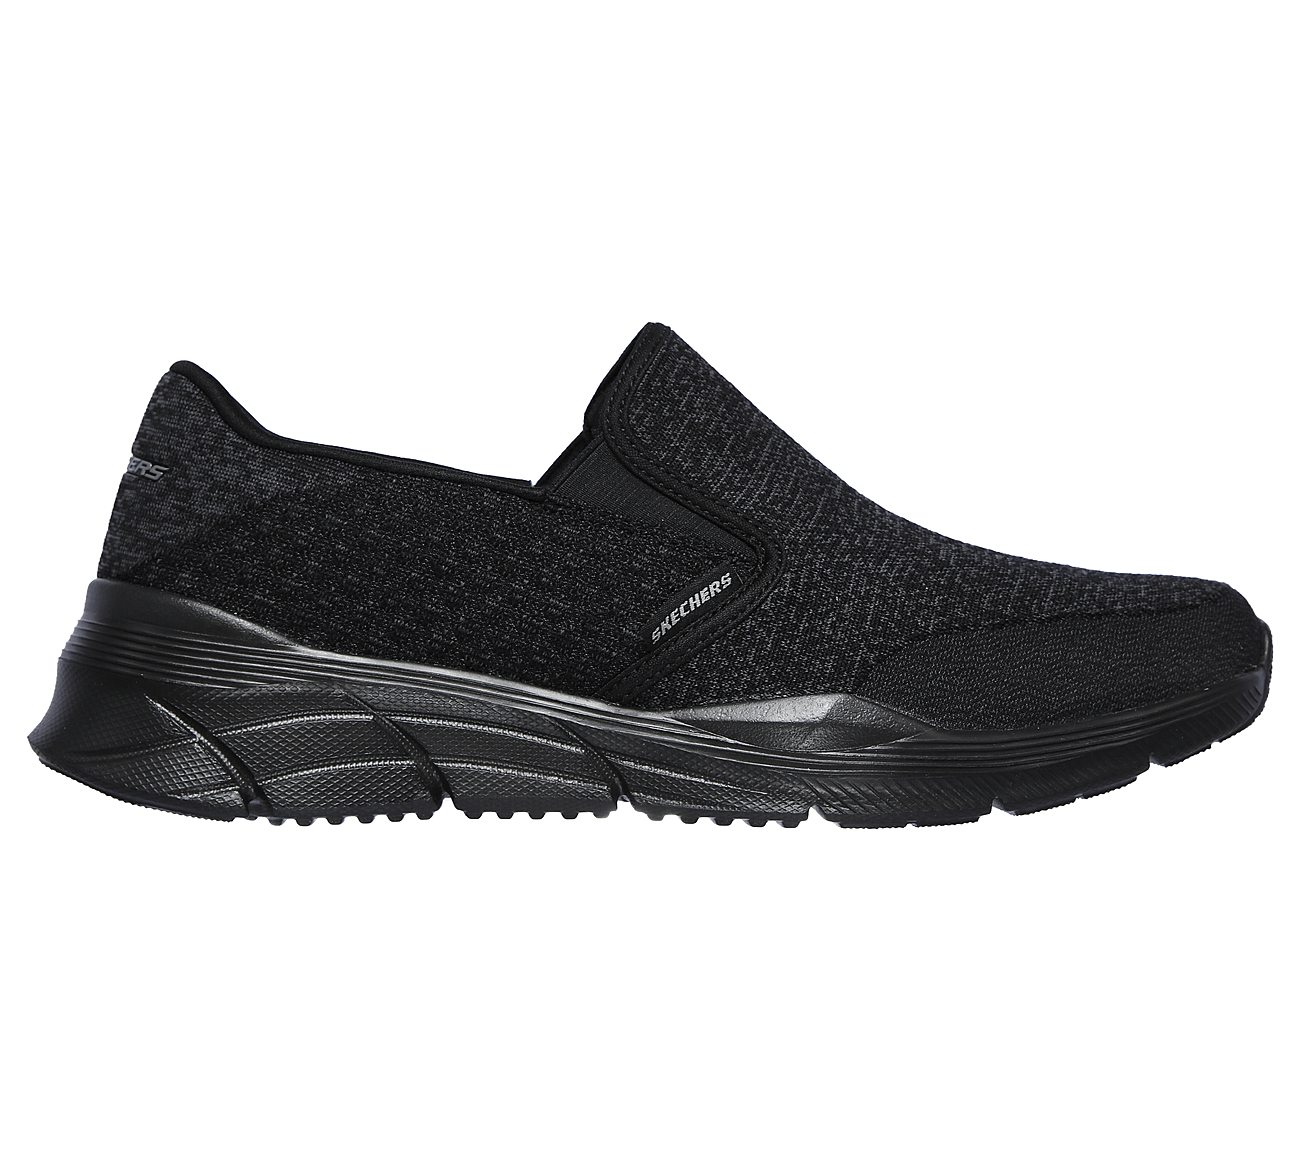 EQUALIZER 4.0 - REVIVIFY, BBLACK Footwear Right View